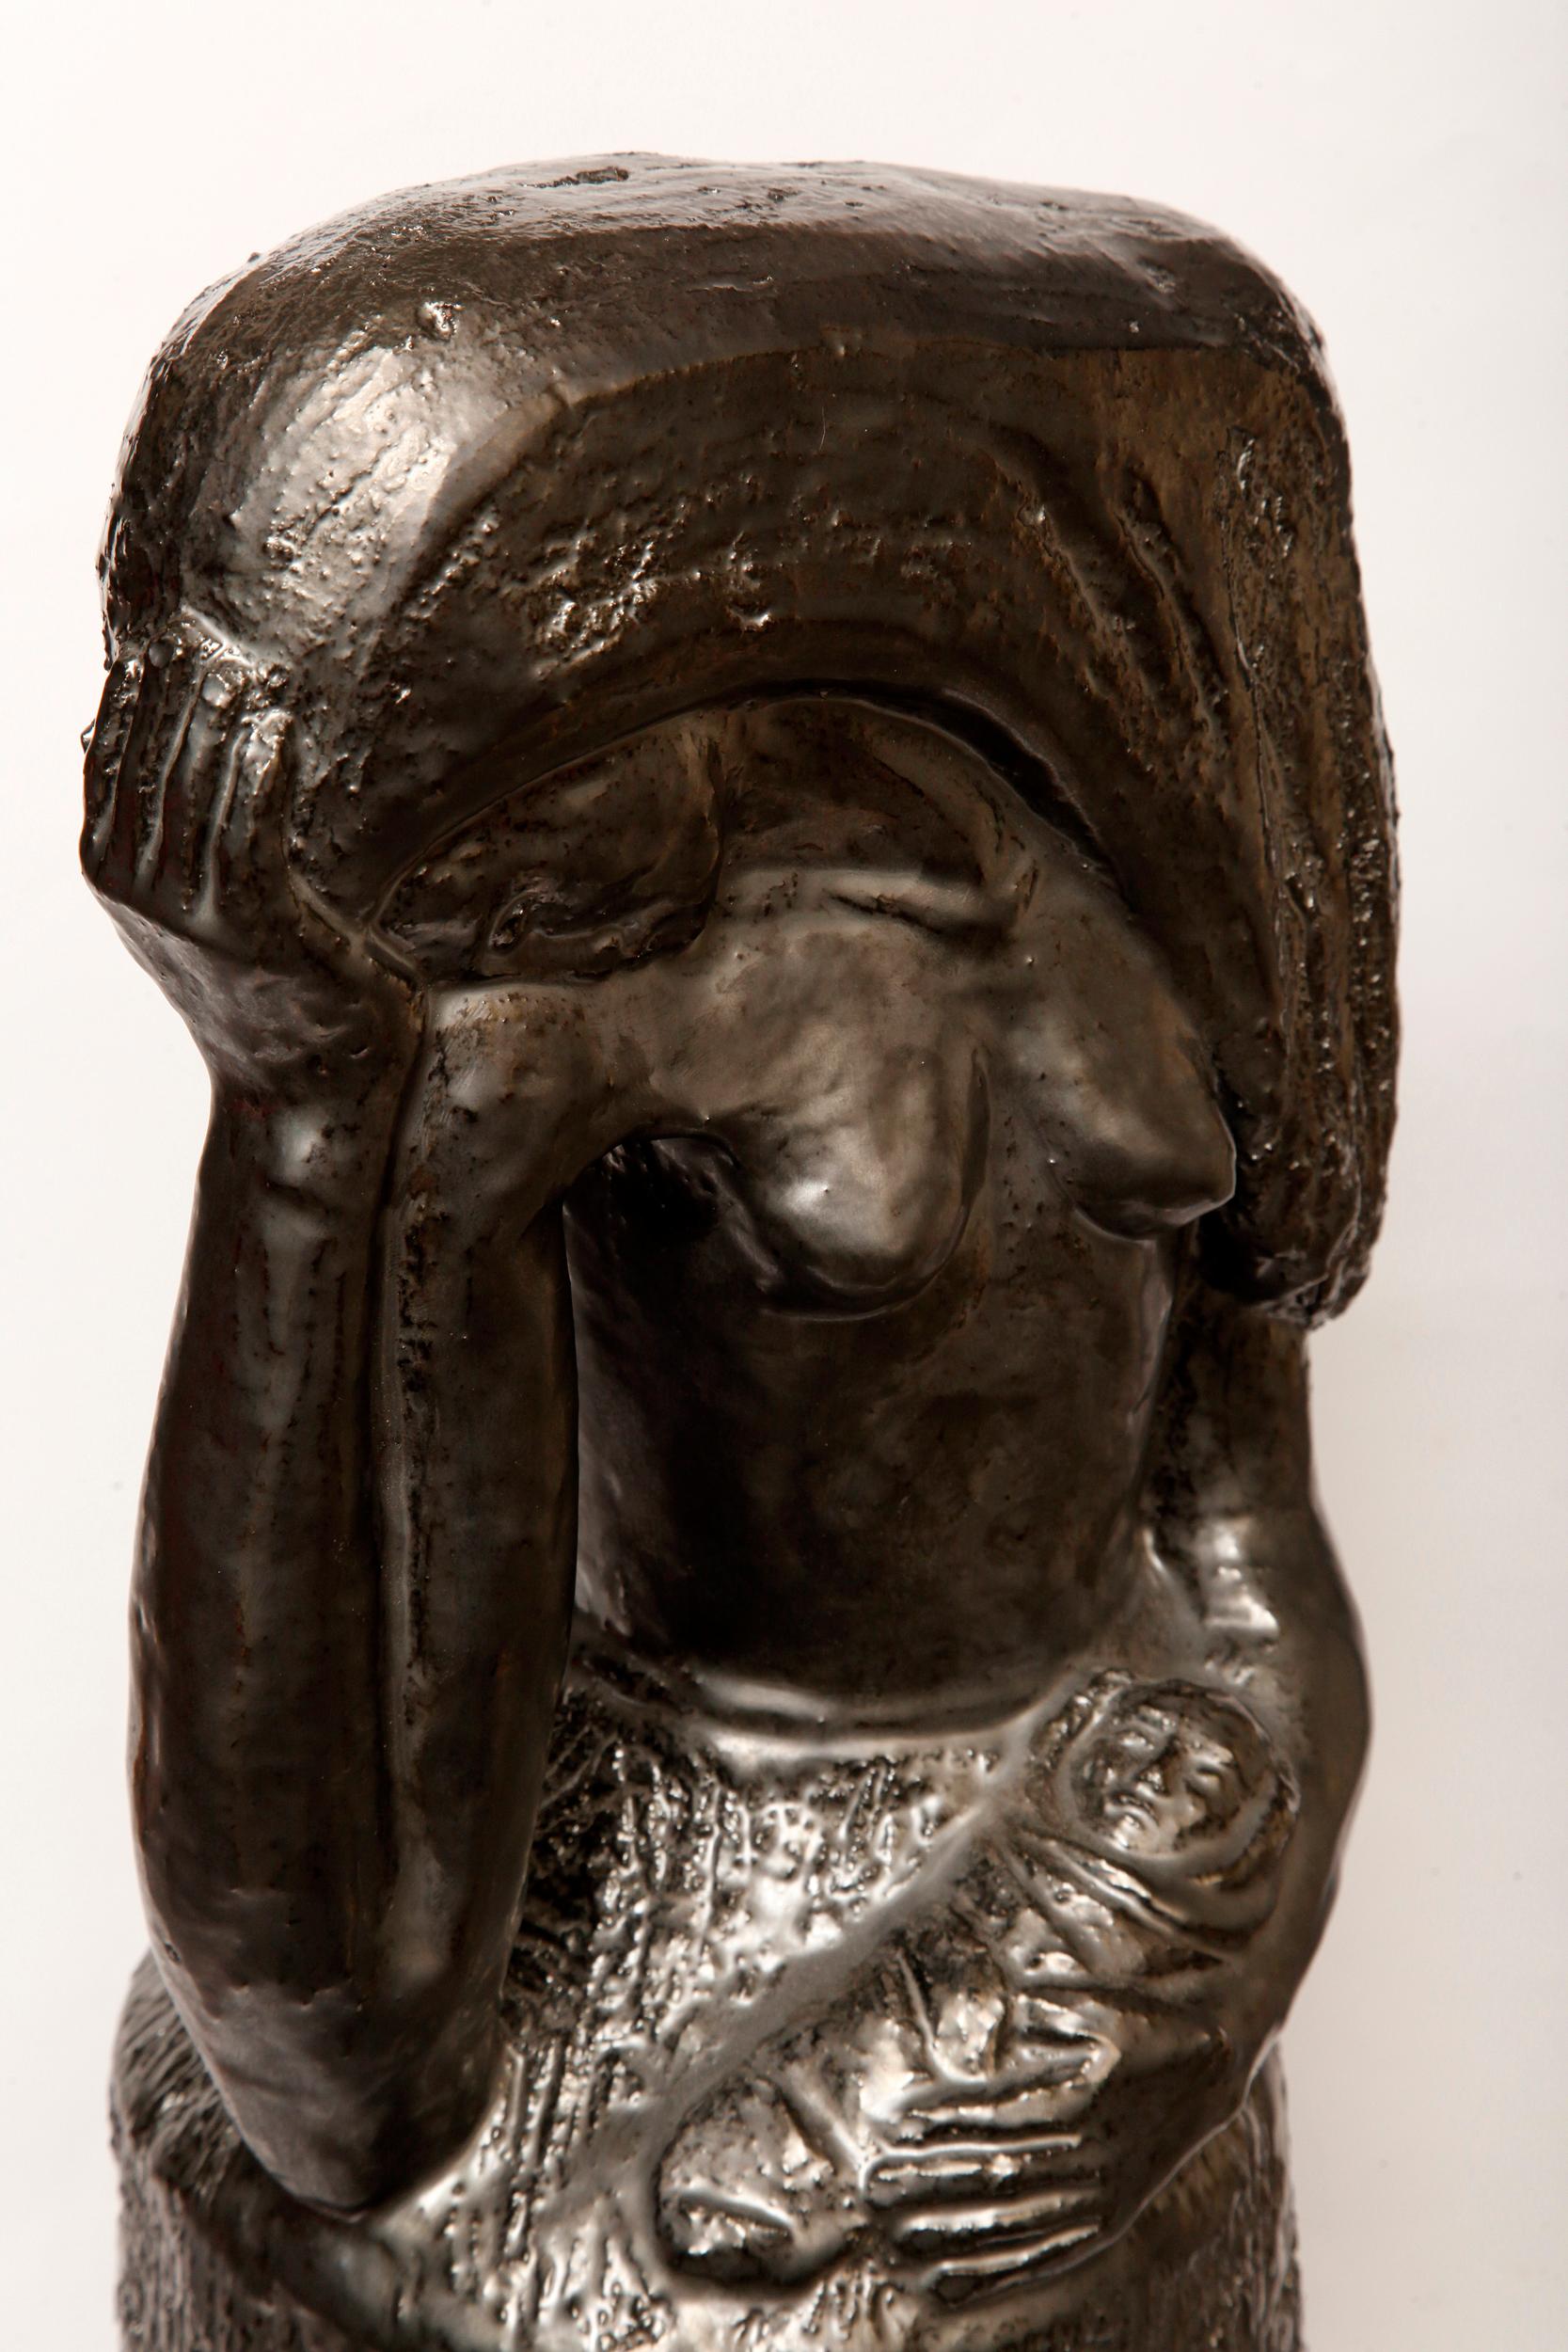 Polish Midcentury Clay and Glazed Sculpture of a Woman, Jerzy Sacha, Poland, 1970s For Sale